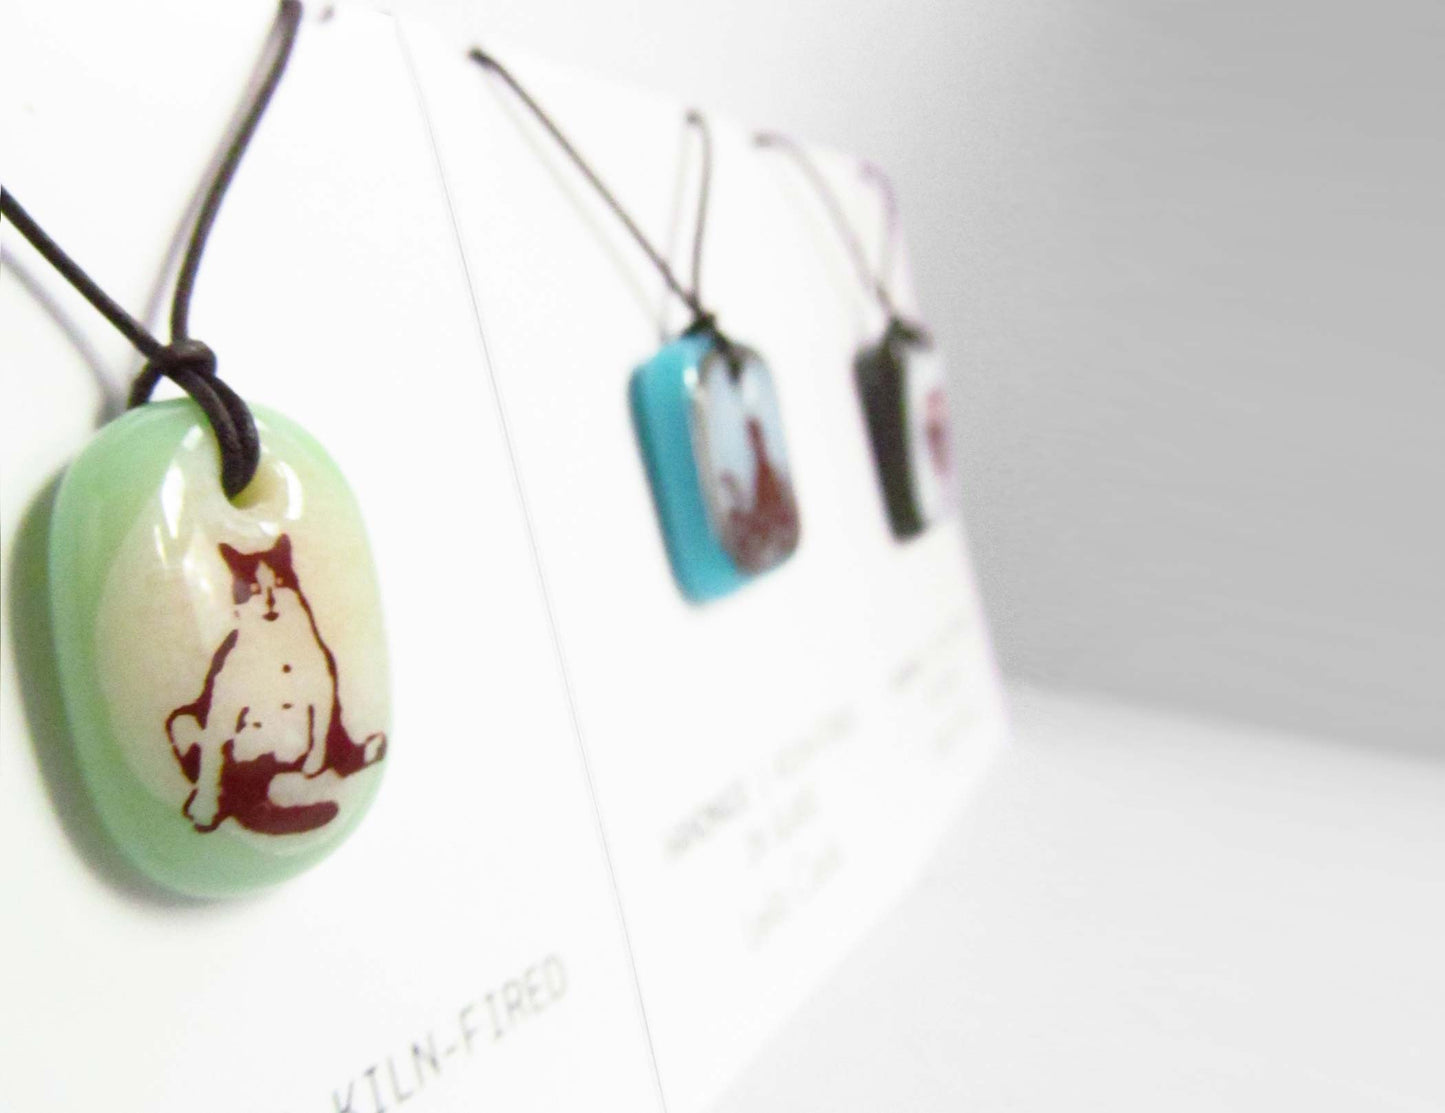 Handmade bird necklaces by Leila Cools. 